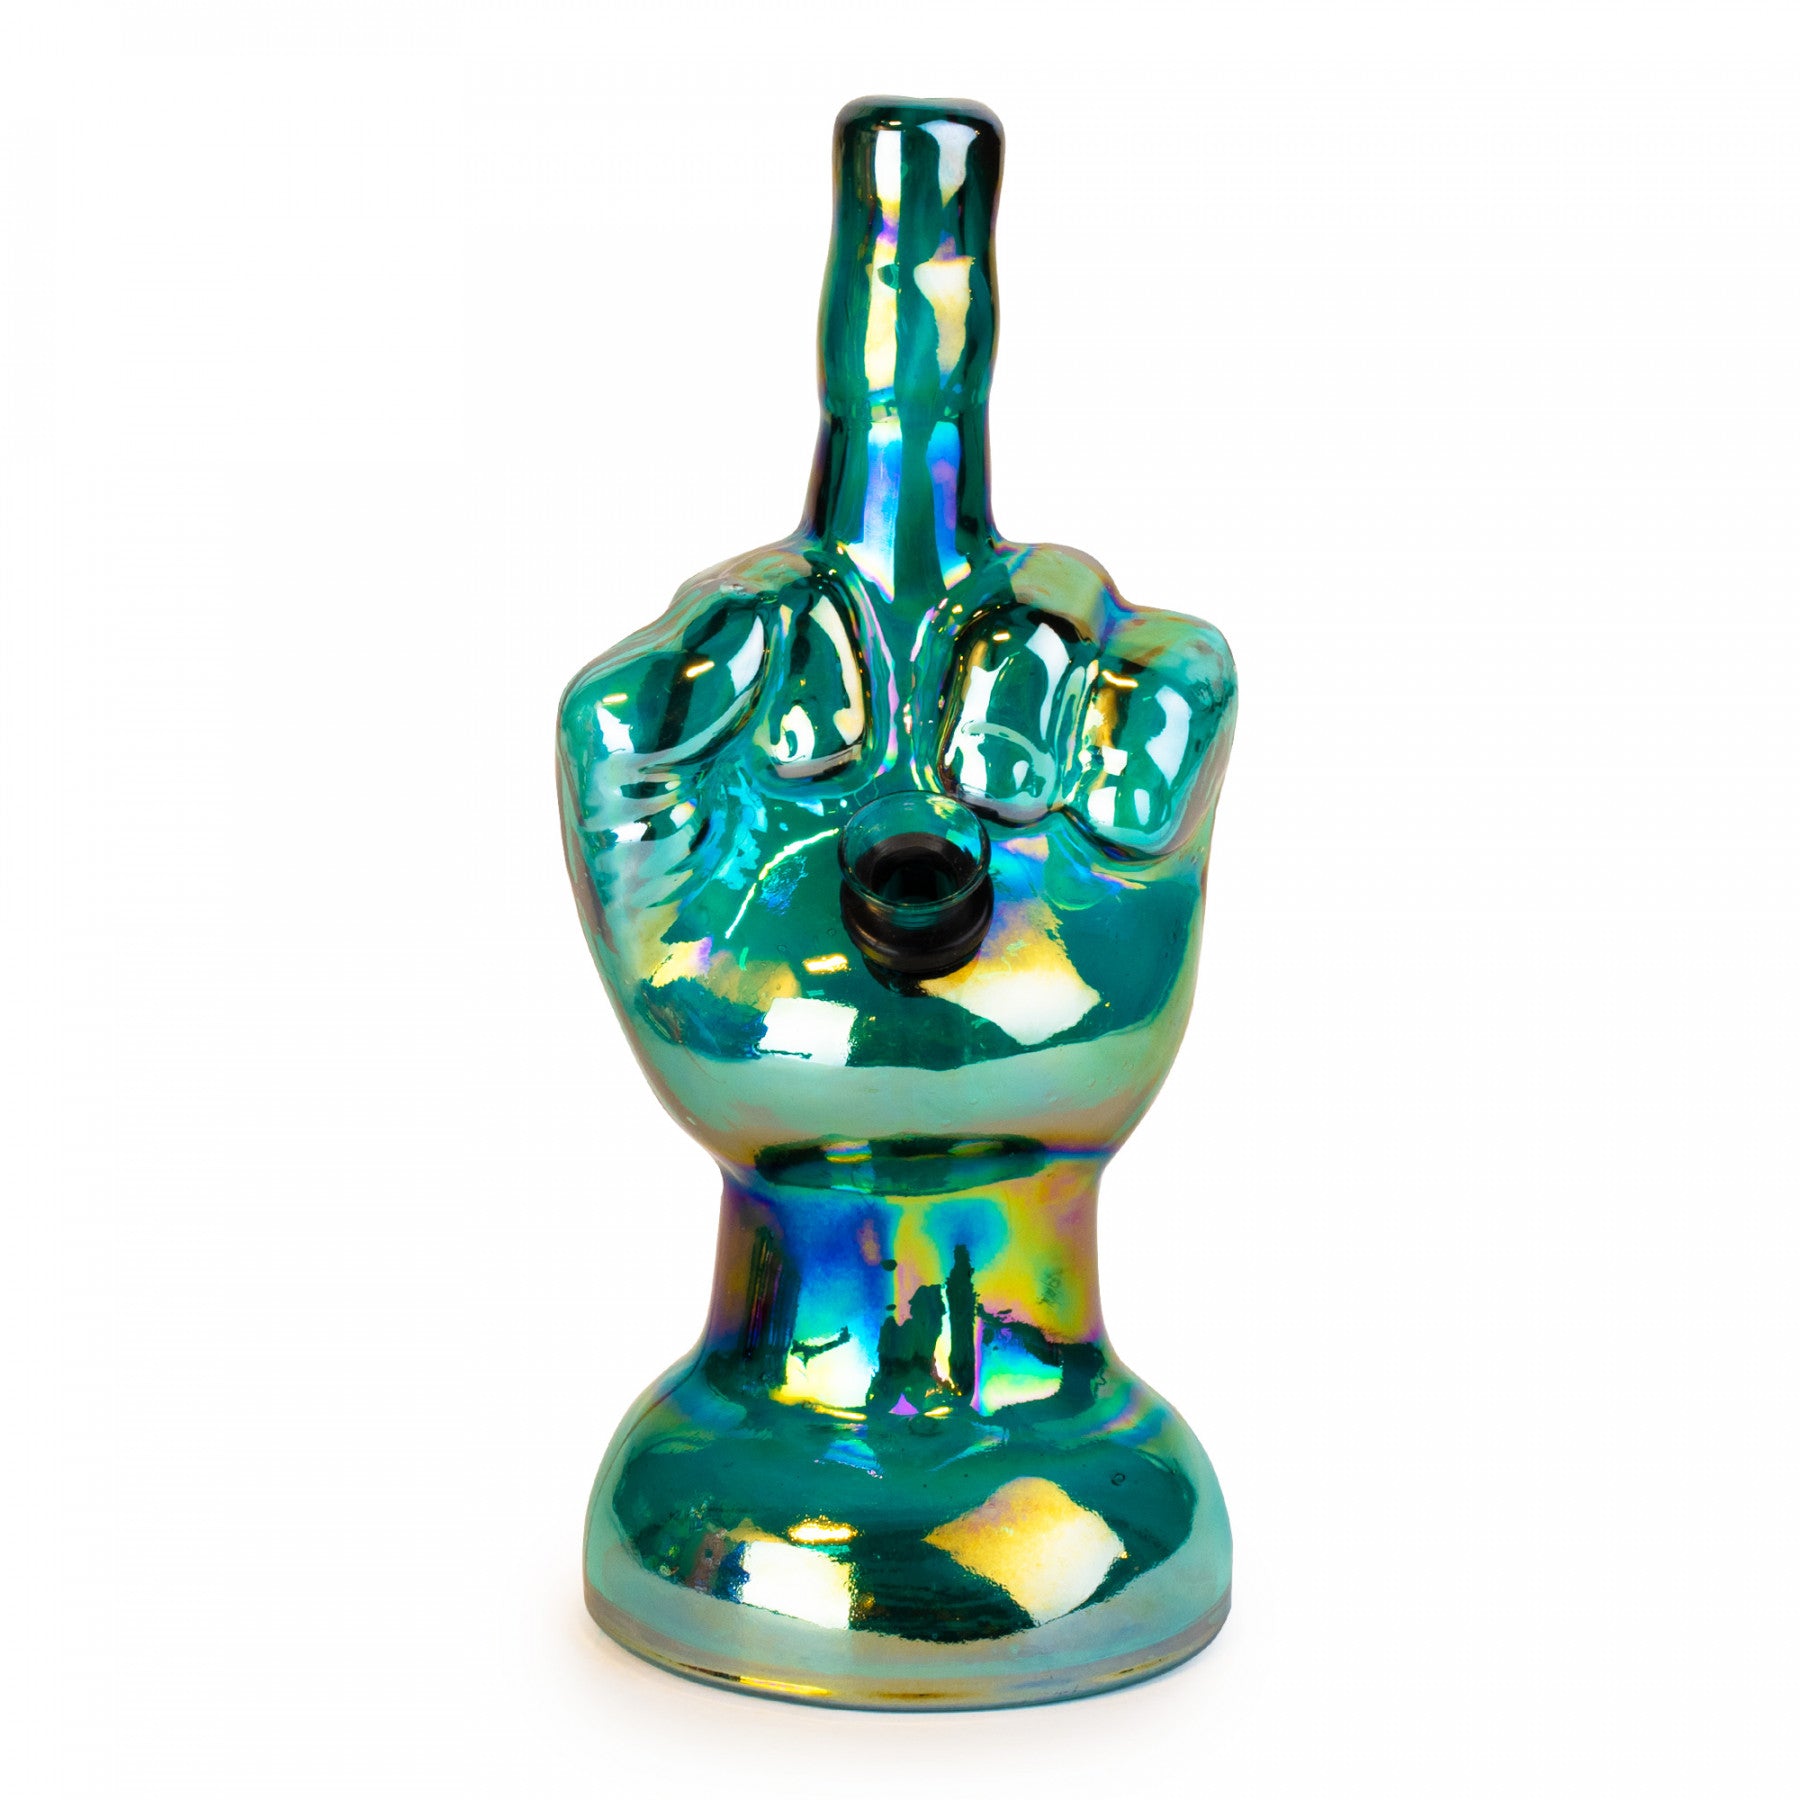 Metallic Green Hand Pipe with Extended Middle Finger